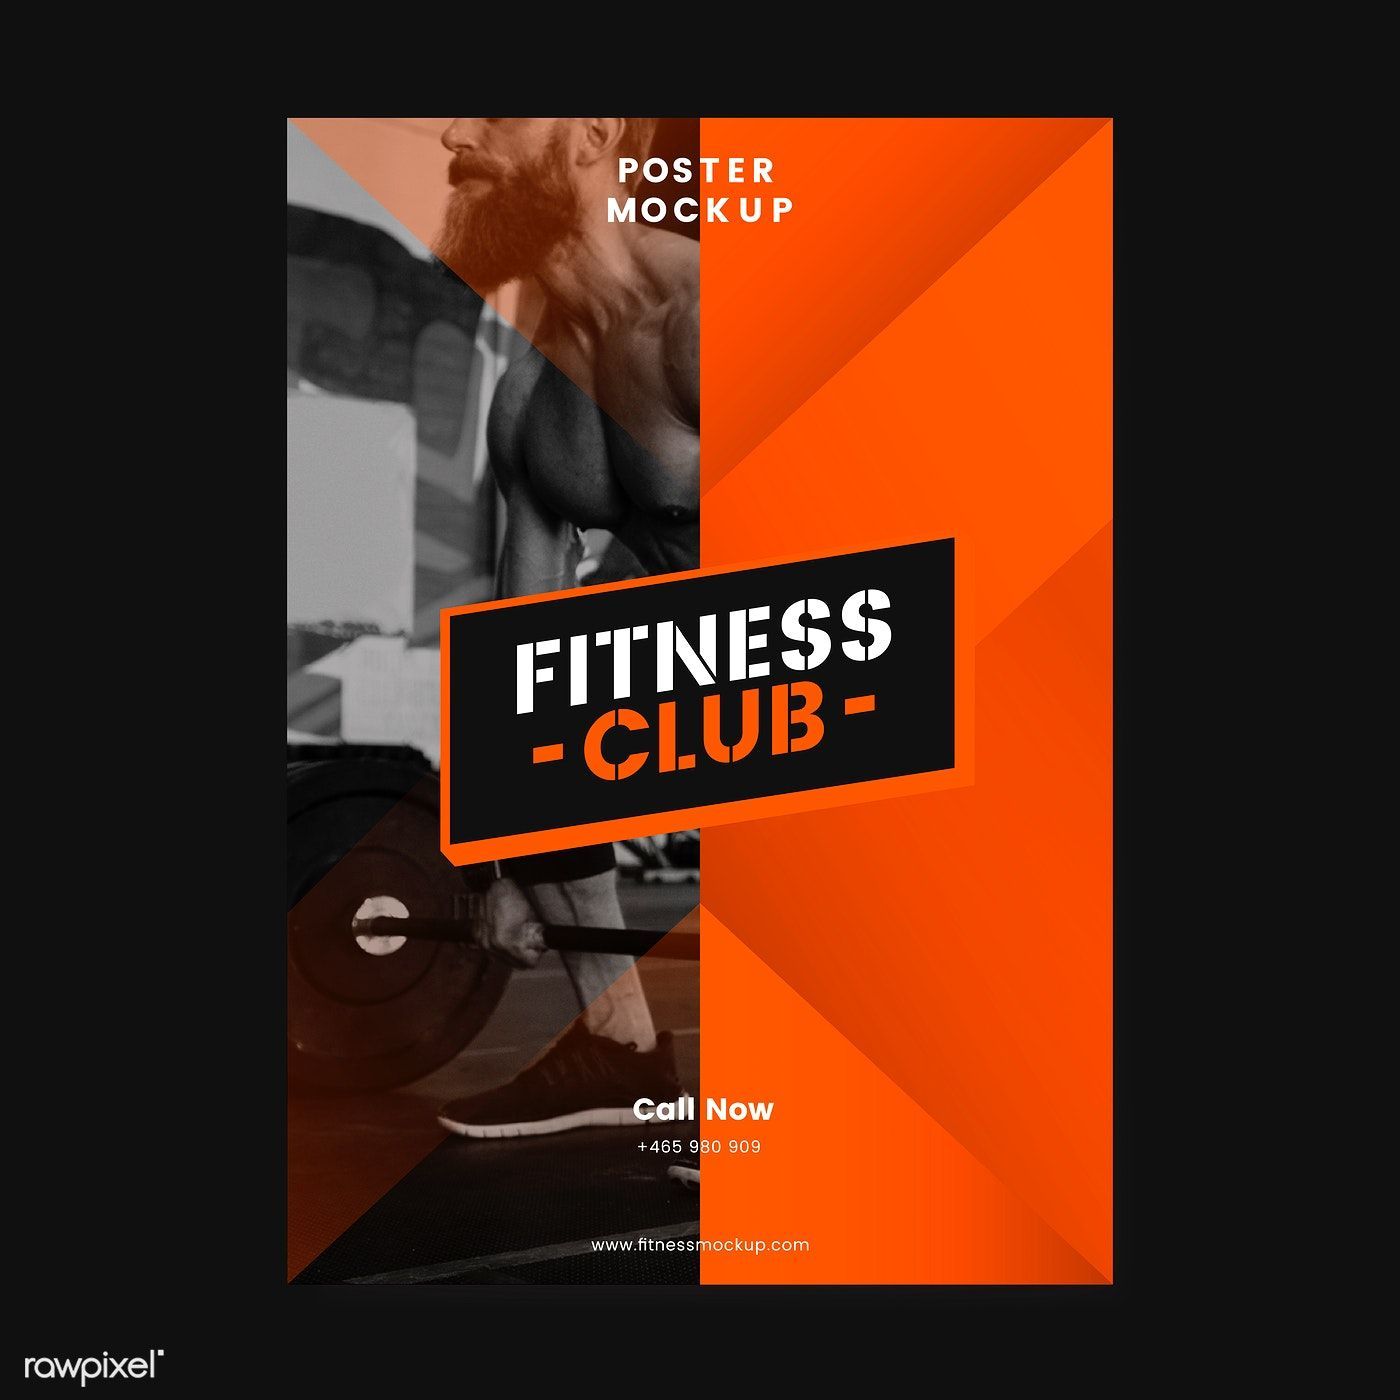 Download free vector of Fitness club promotional poster vector 533047 - Download free vector of Fitness club promotional poster vector 533047 -   fitness Poster vector